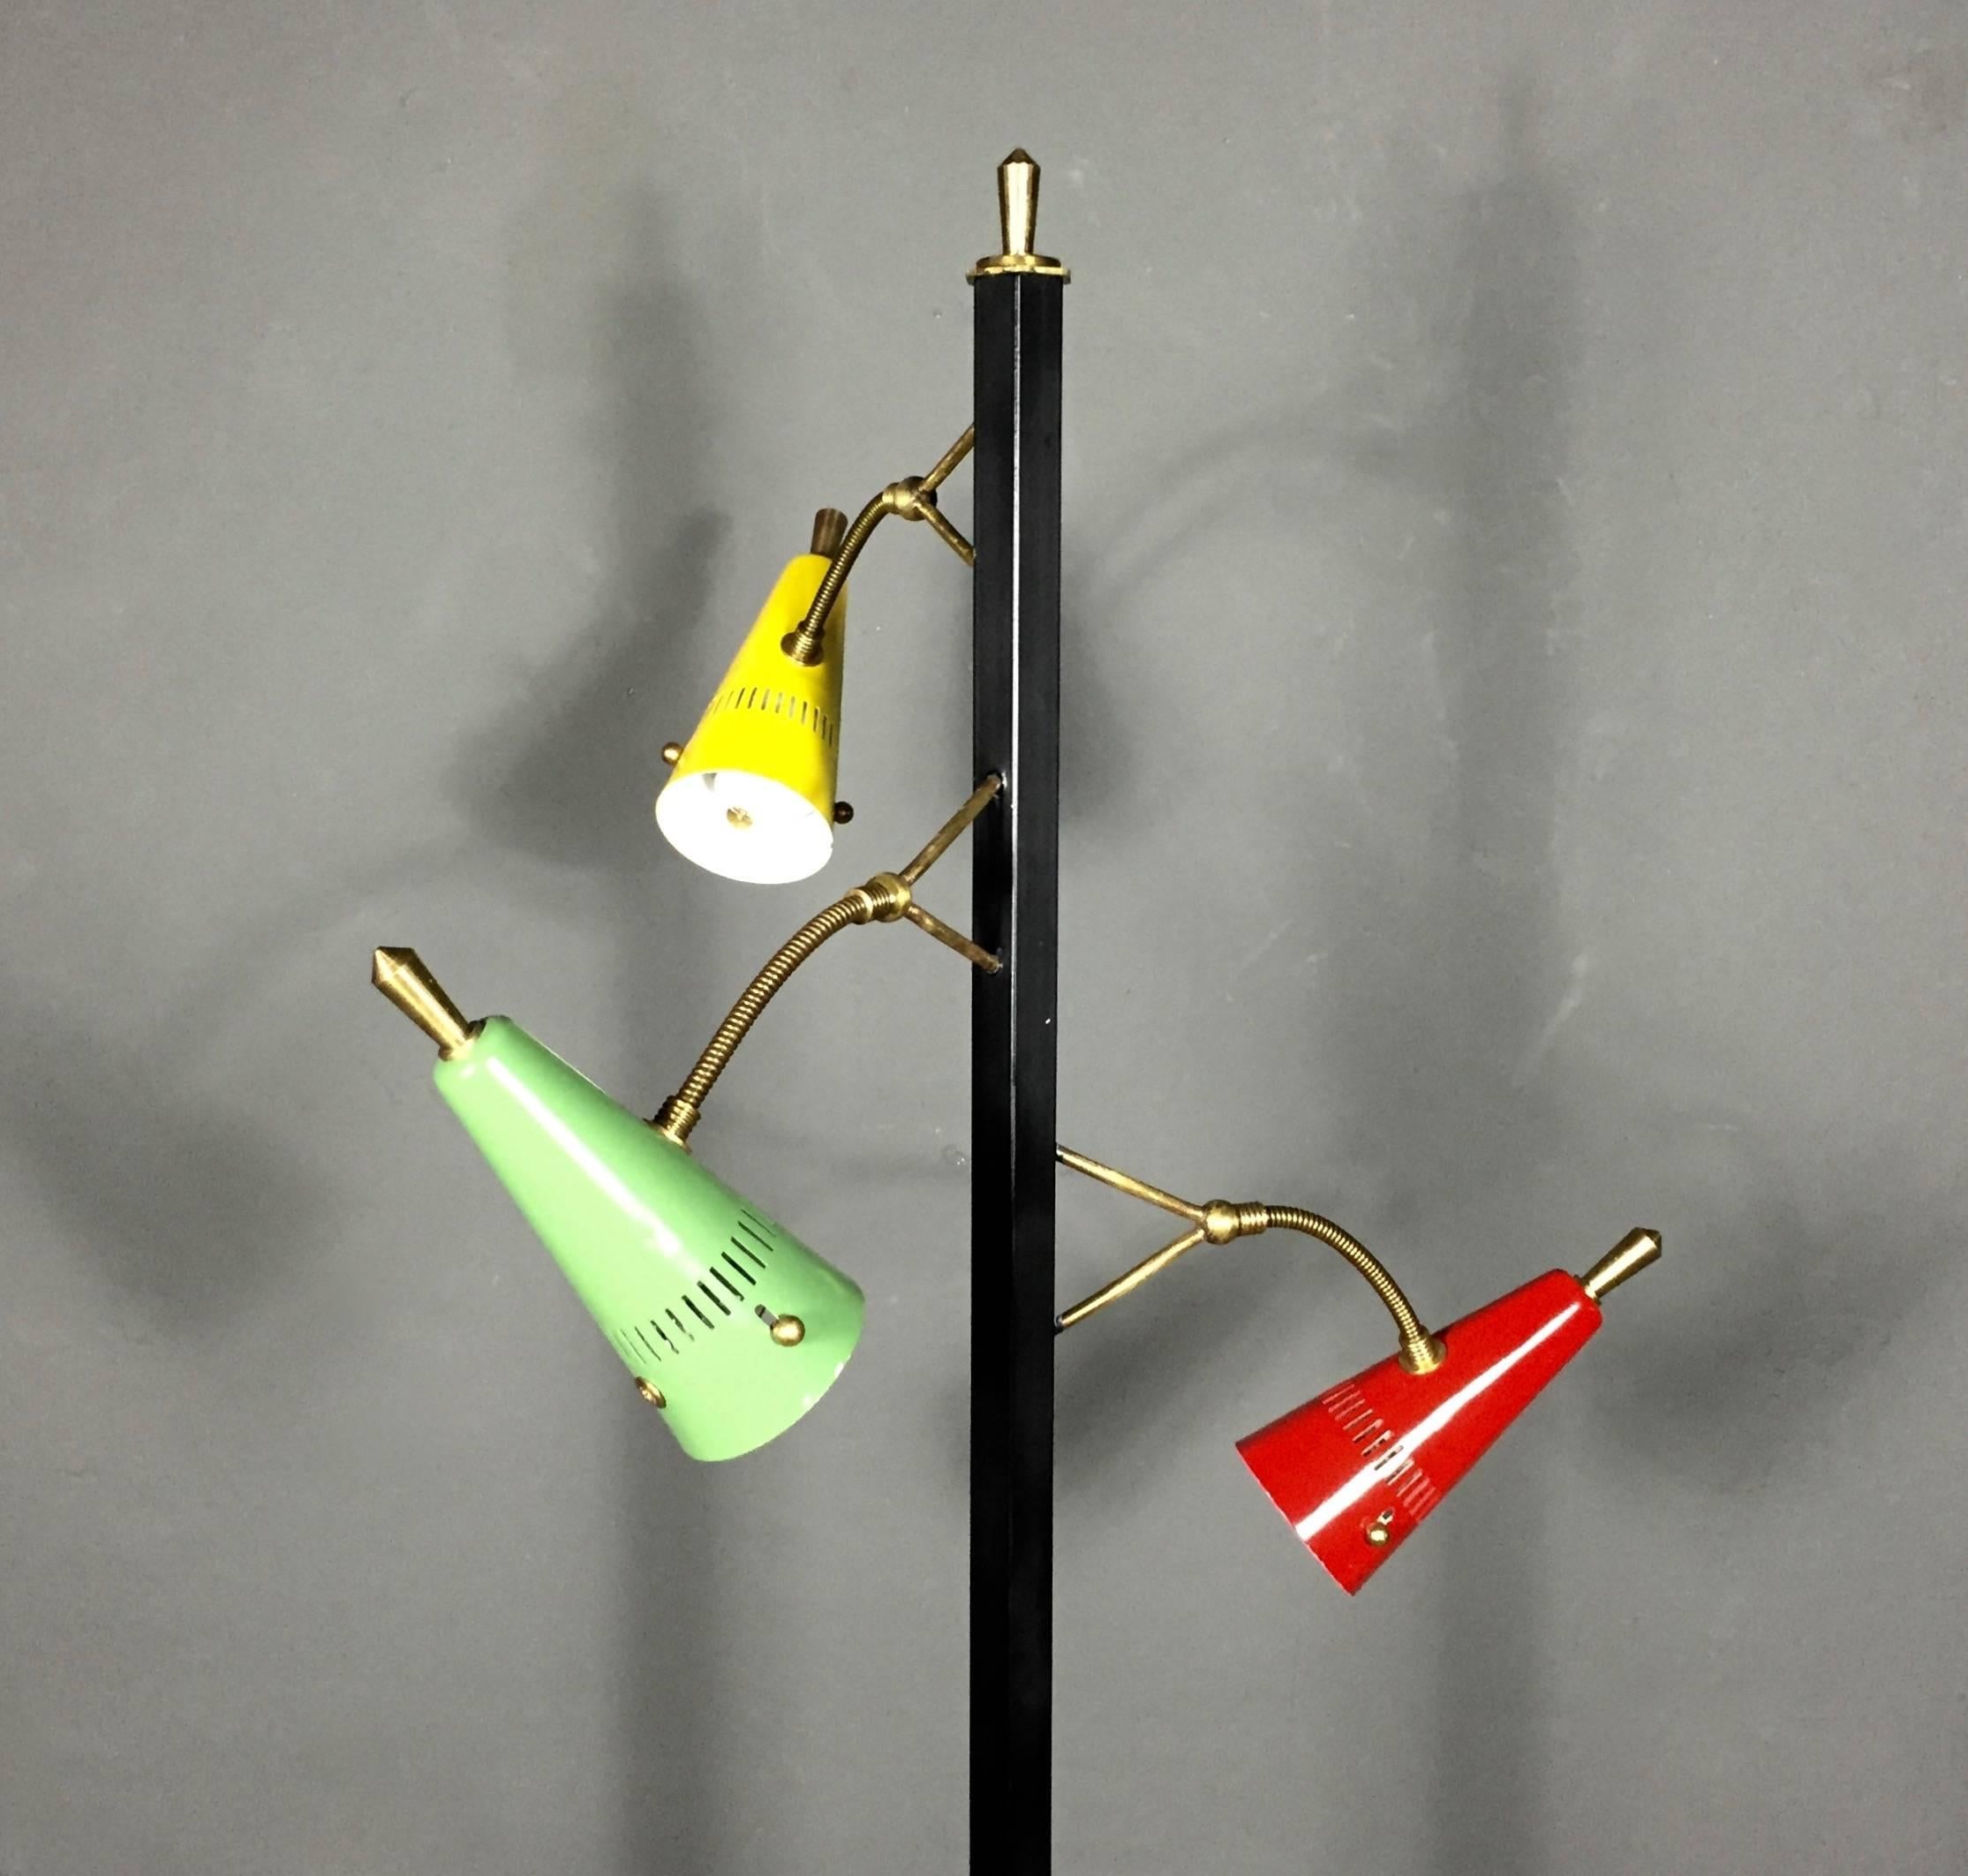 An unusual floor lamp with Classic enameled and perforated metal (red, yellow and lime green) with black painted stand on atypical triangular-shaped marble base. All three lamps have adjustable heads and supported by dual brass arms. Floor-foot